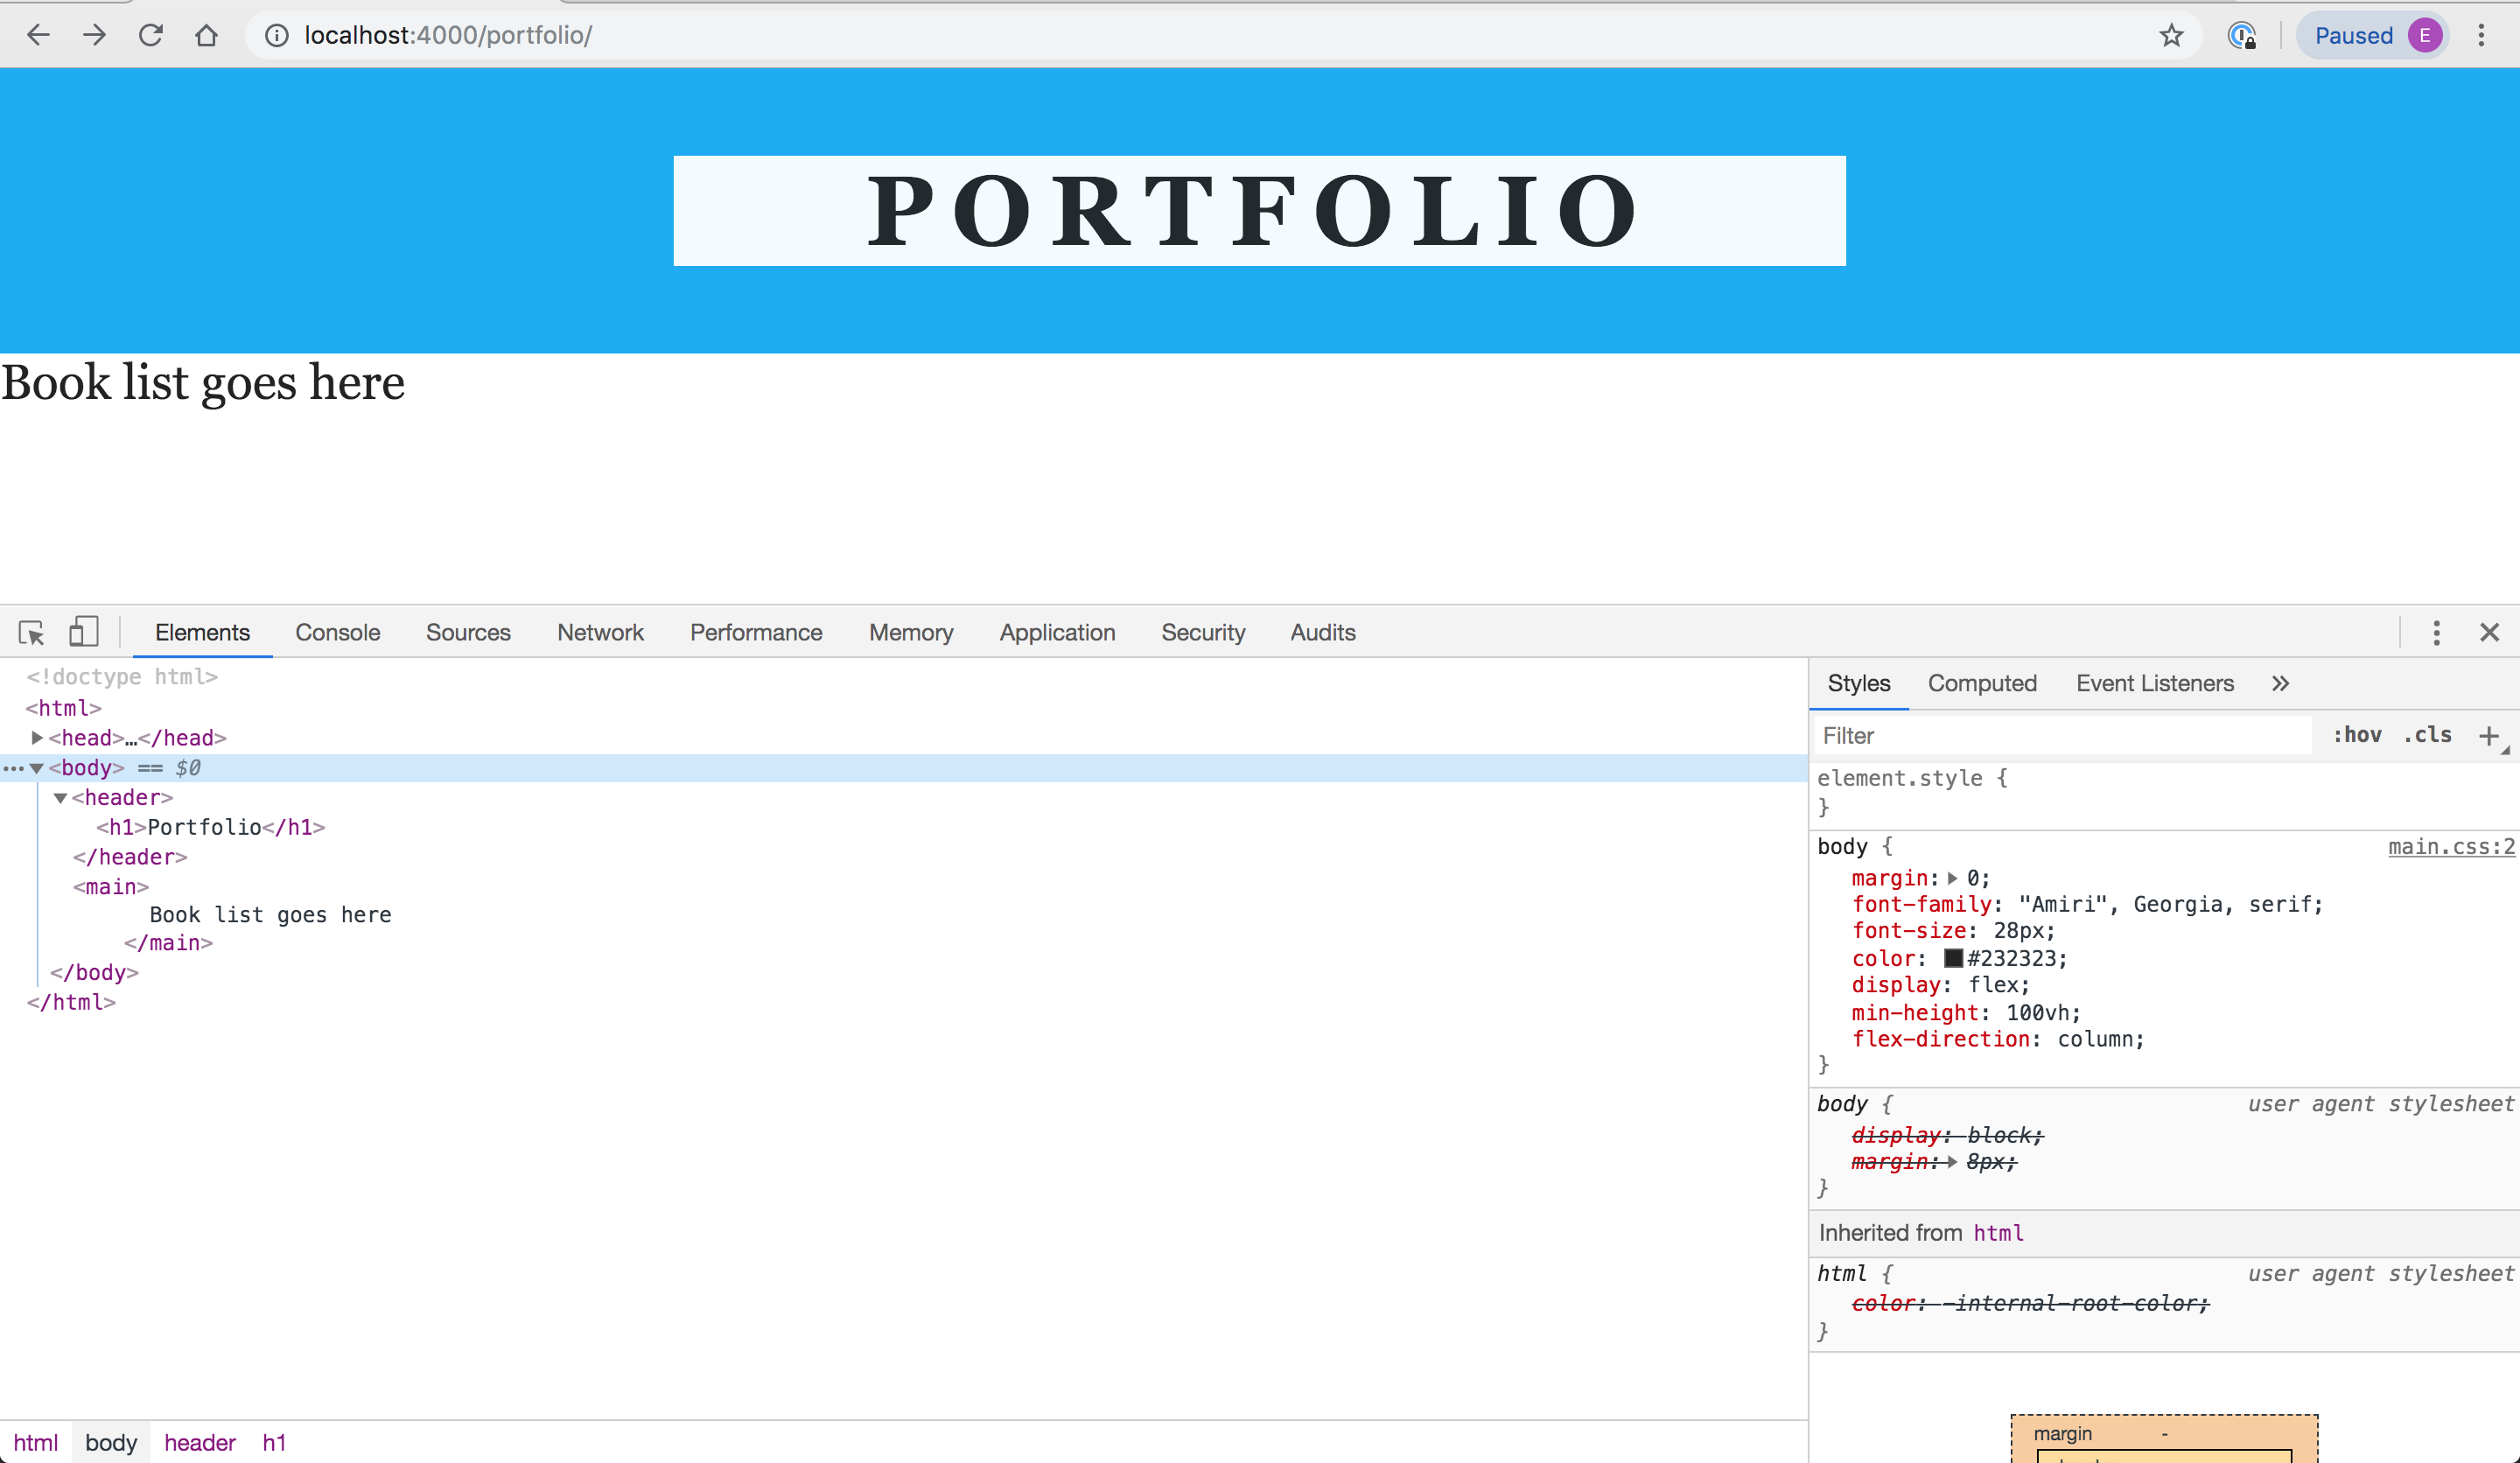 Screenshot showing a nicely styled website with a nice blue header